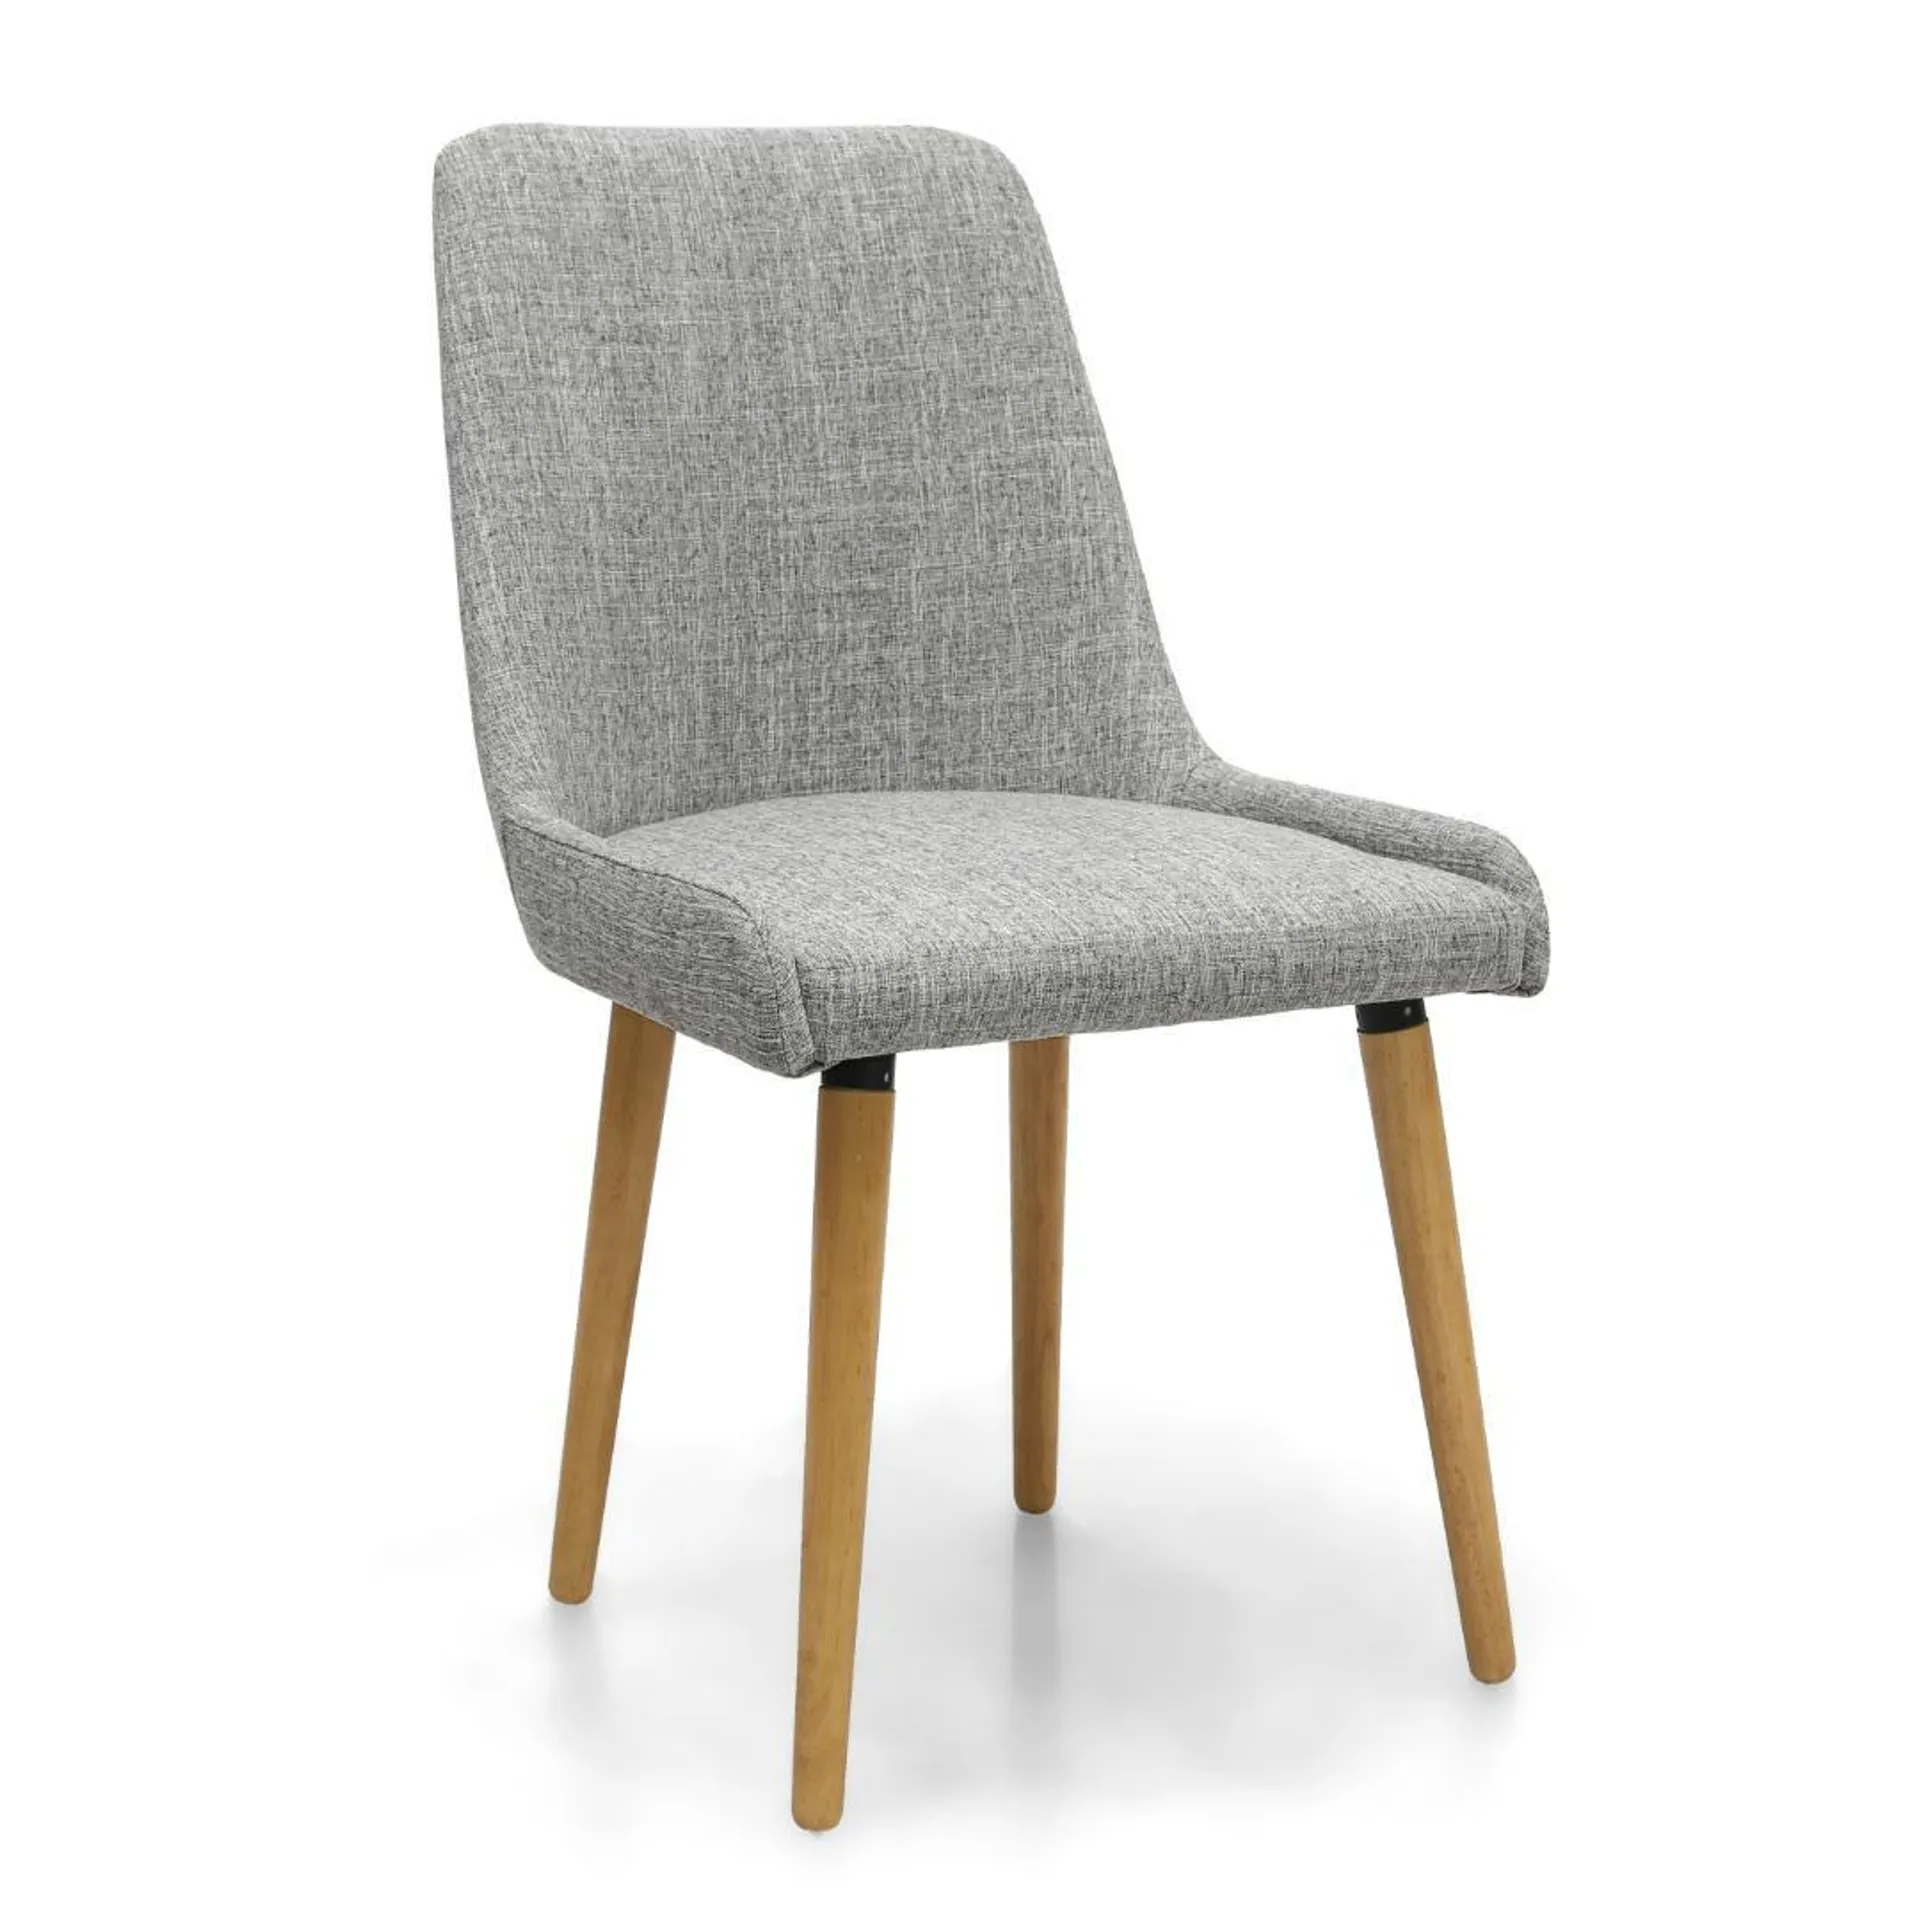 Capri Flax Effect Grey Weave Dining Chair Set Of 2